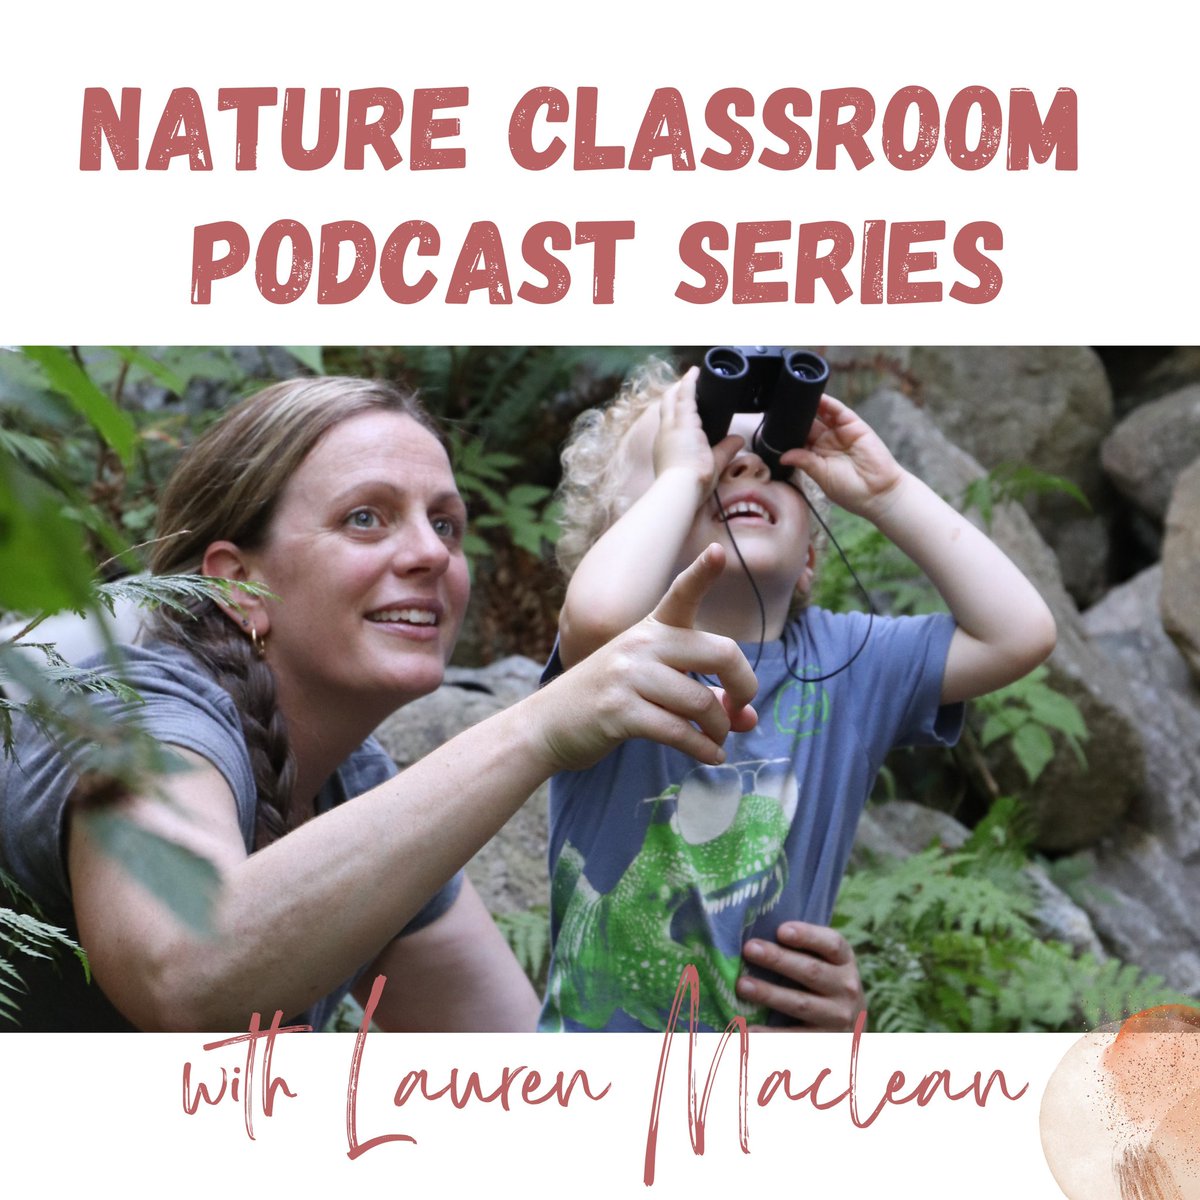 What K.S said about the new podcast series: “This was a very helpful series! Lots of great examples and resources that I can use in my classroom.” Glad you enjoyed it! Register here: app.helloaudio.fm/feed/f3e99790-… #podcast #teachoutdoors #outdoorclassroom